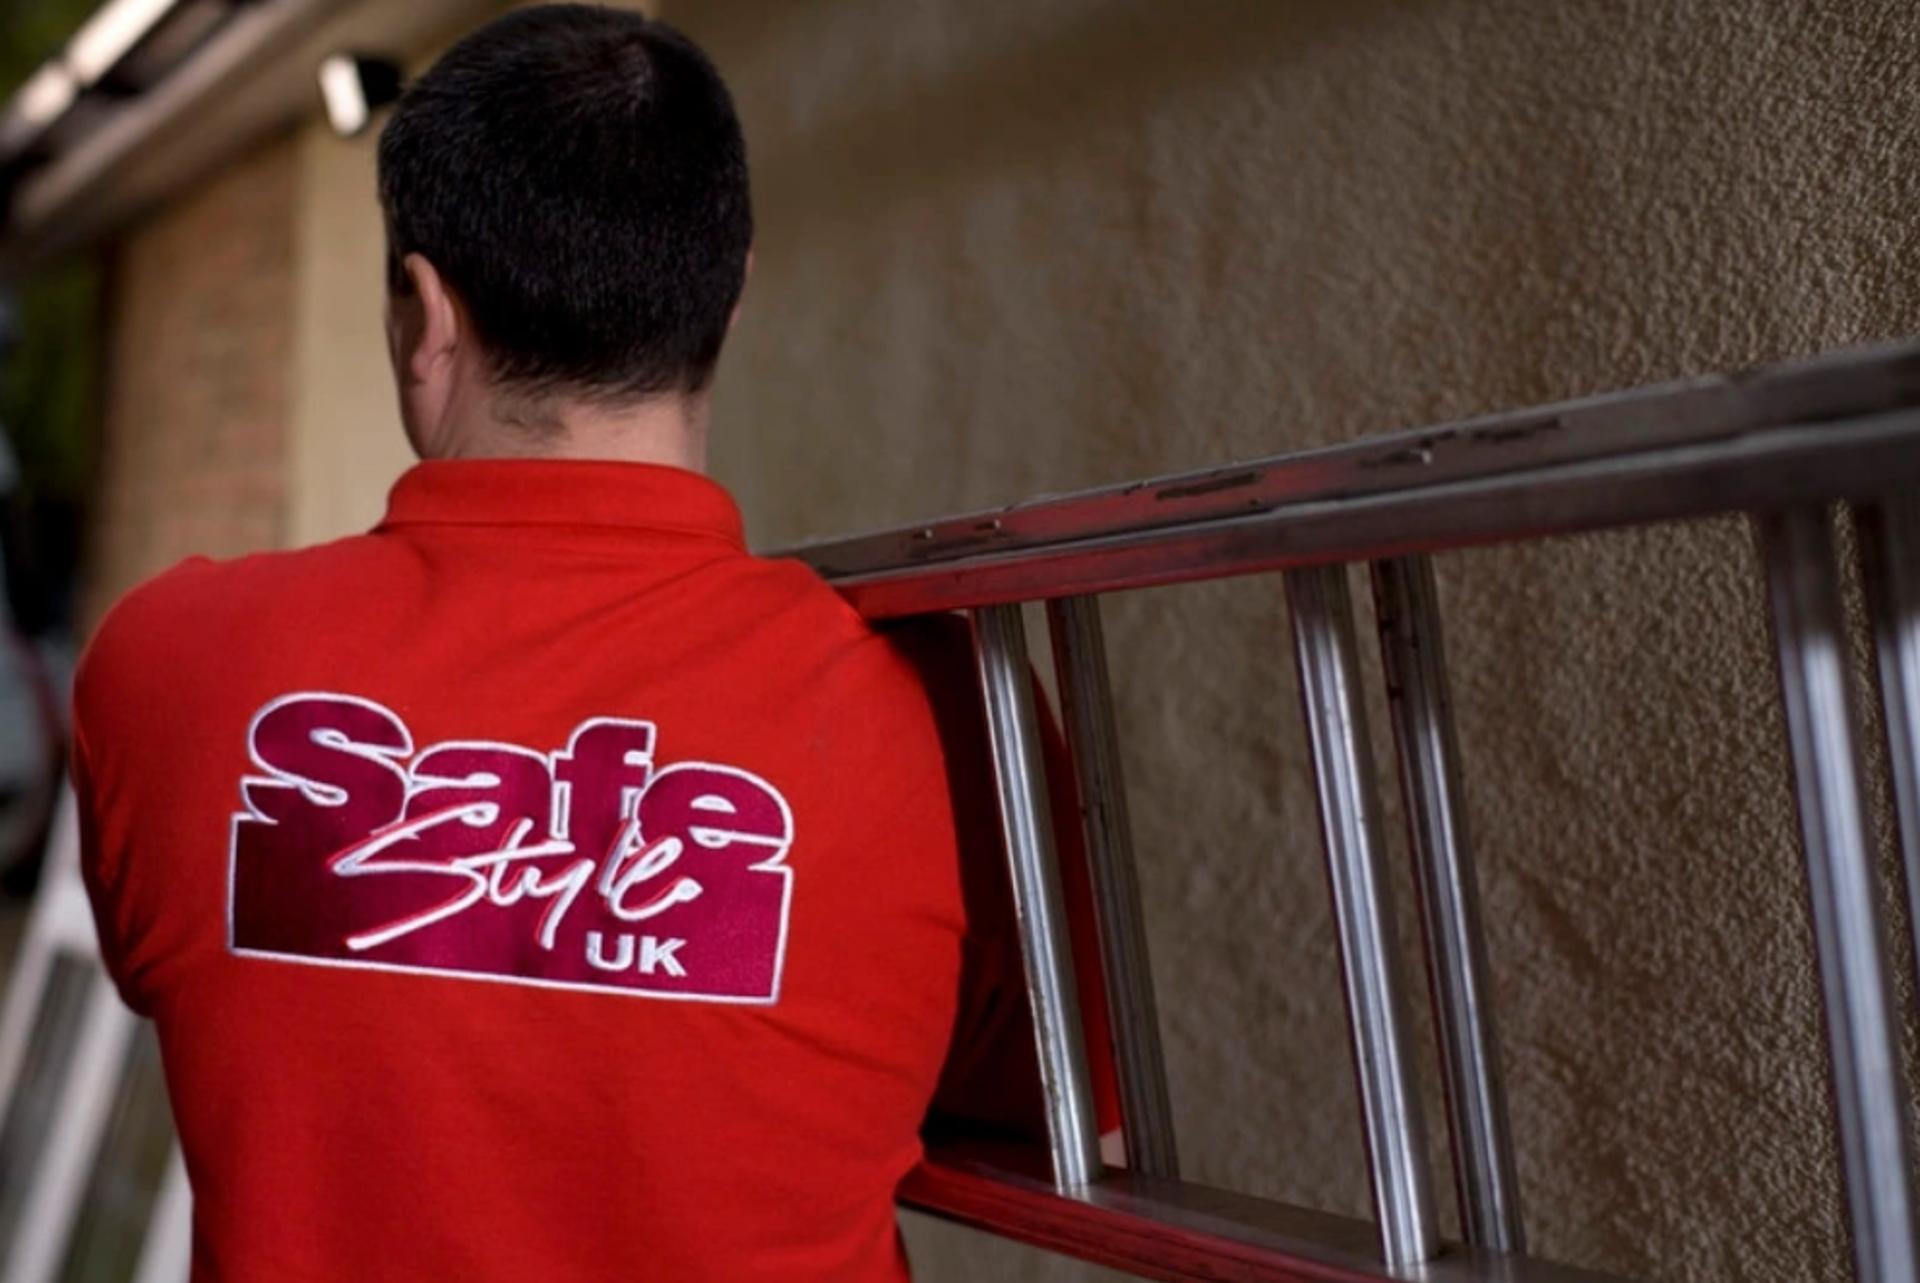 Anglian Windows to acquire Safestyle order book from administrators